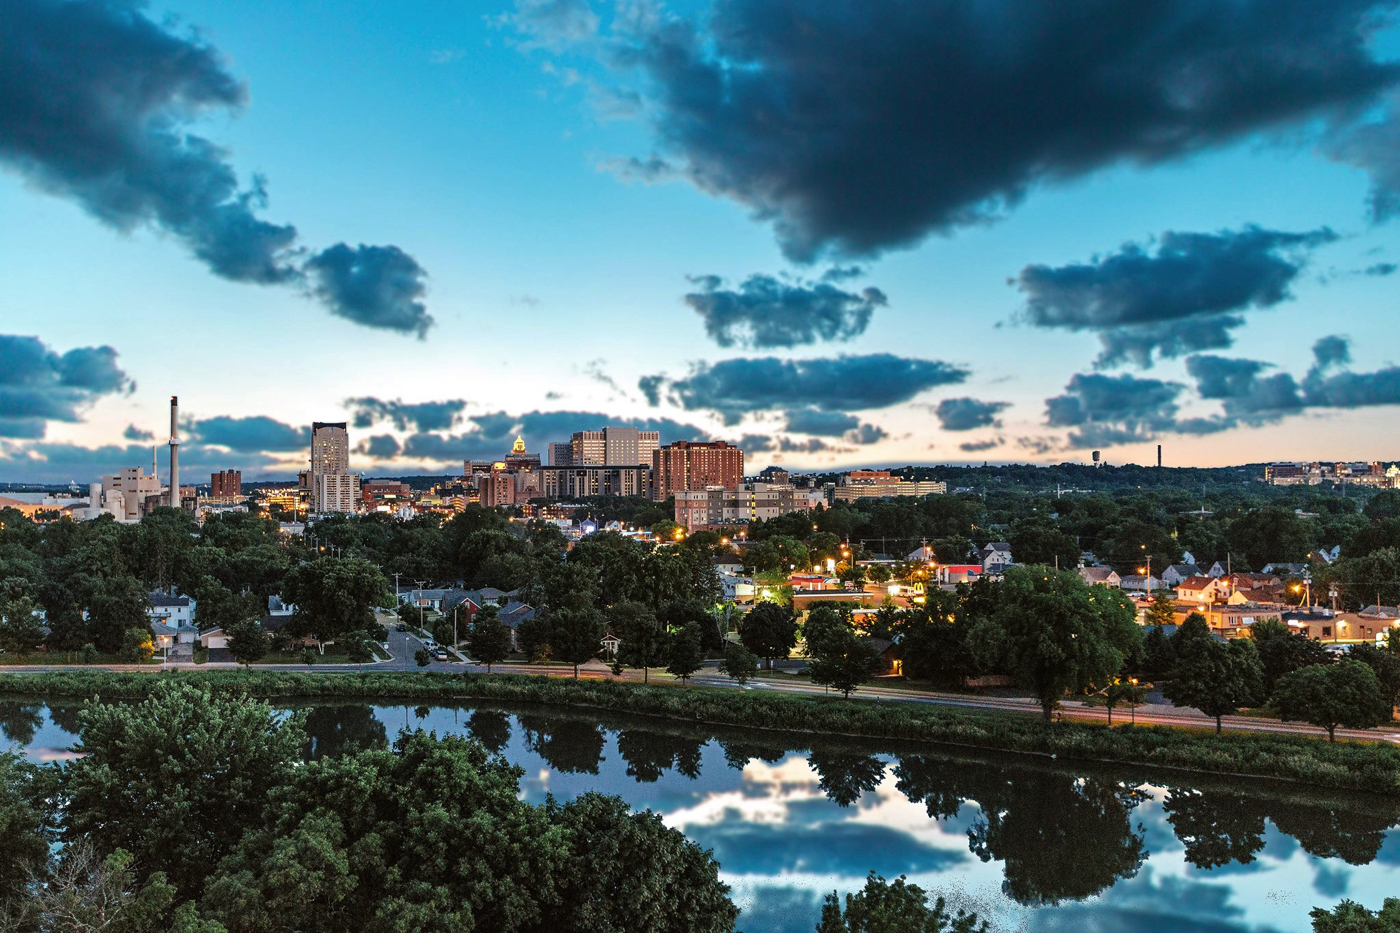 19 GREAT THINGS TO DO IN ROCHESTER MN YOU'LL LOVE